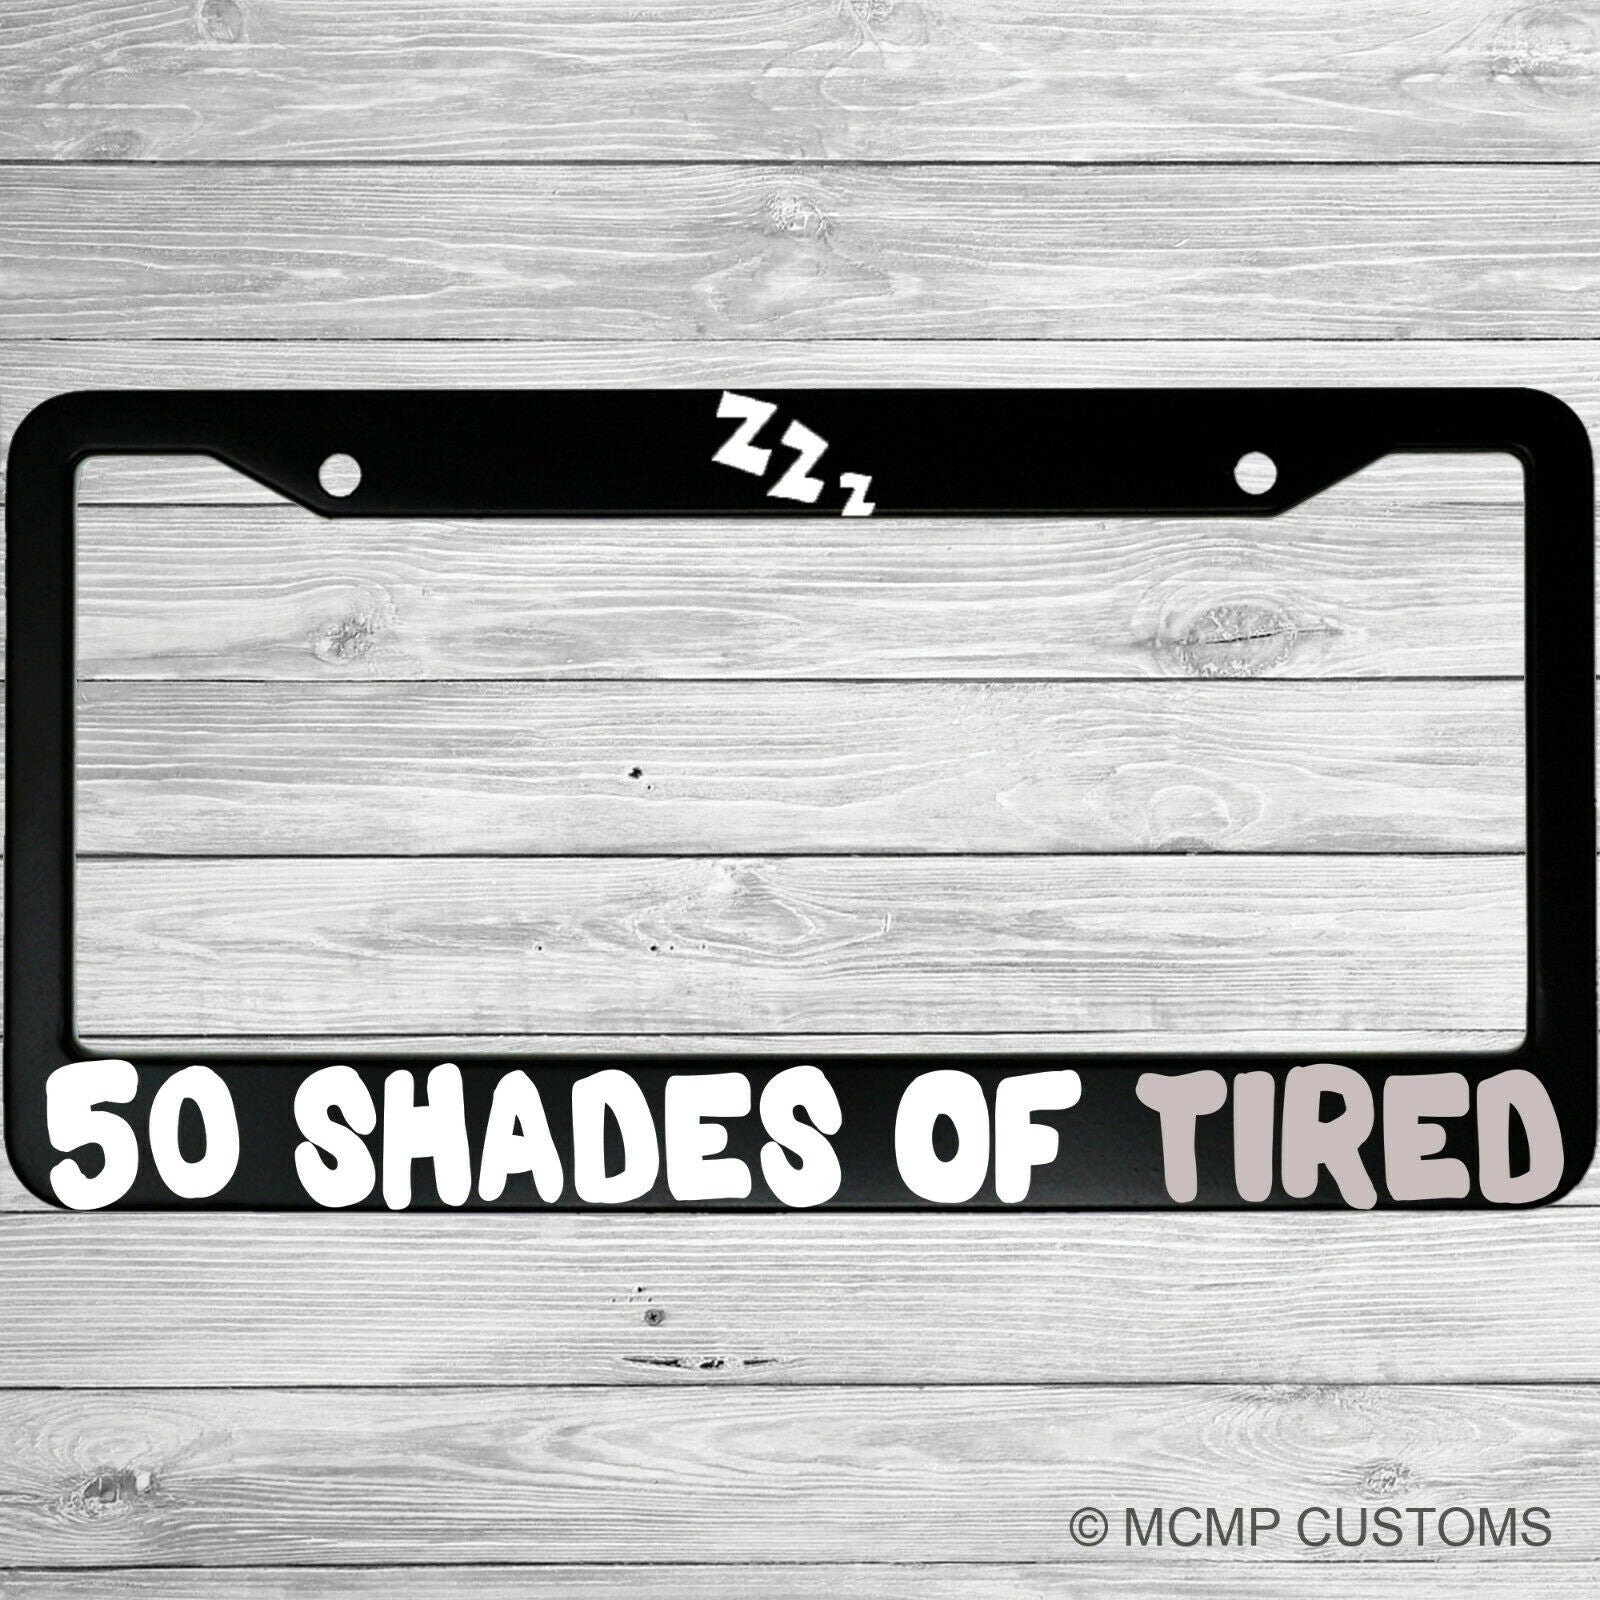 50 Shades Of Tired Aluminum Car License Plate Frame